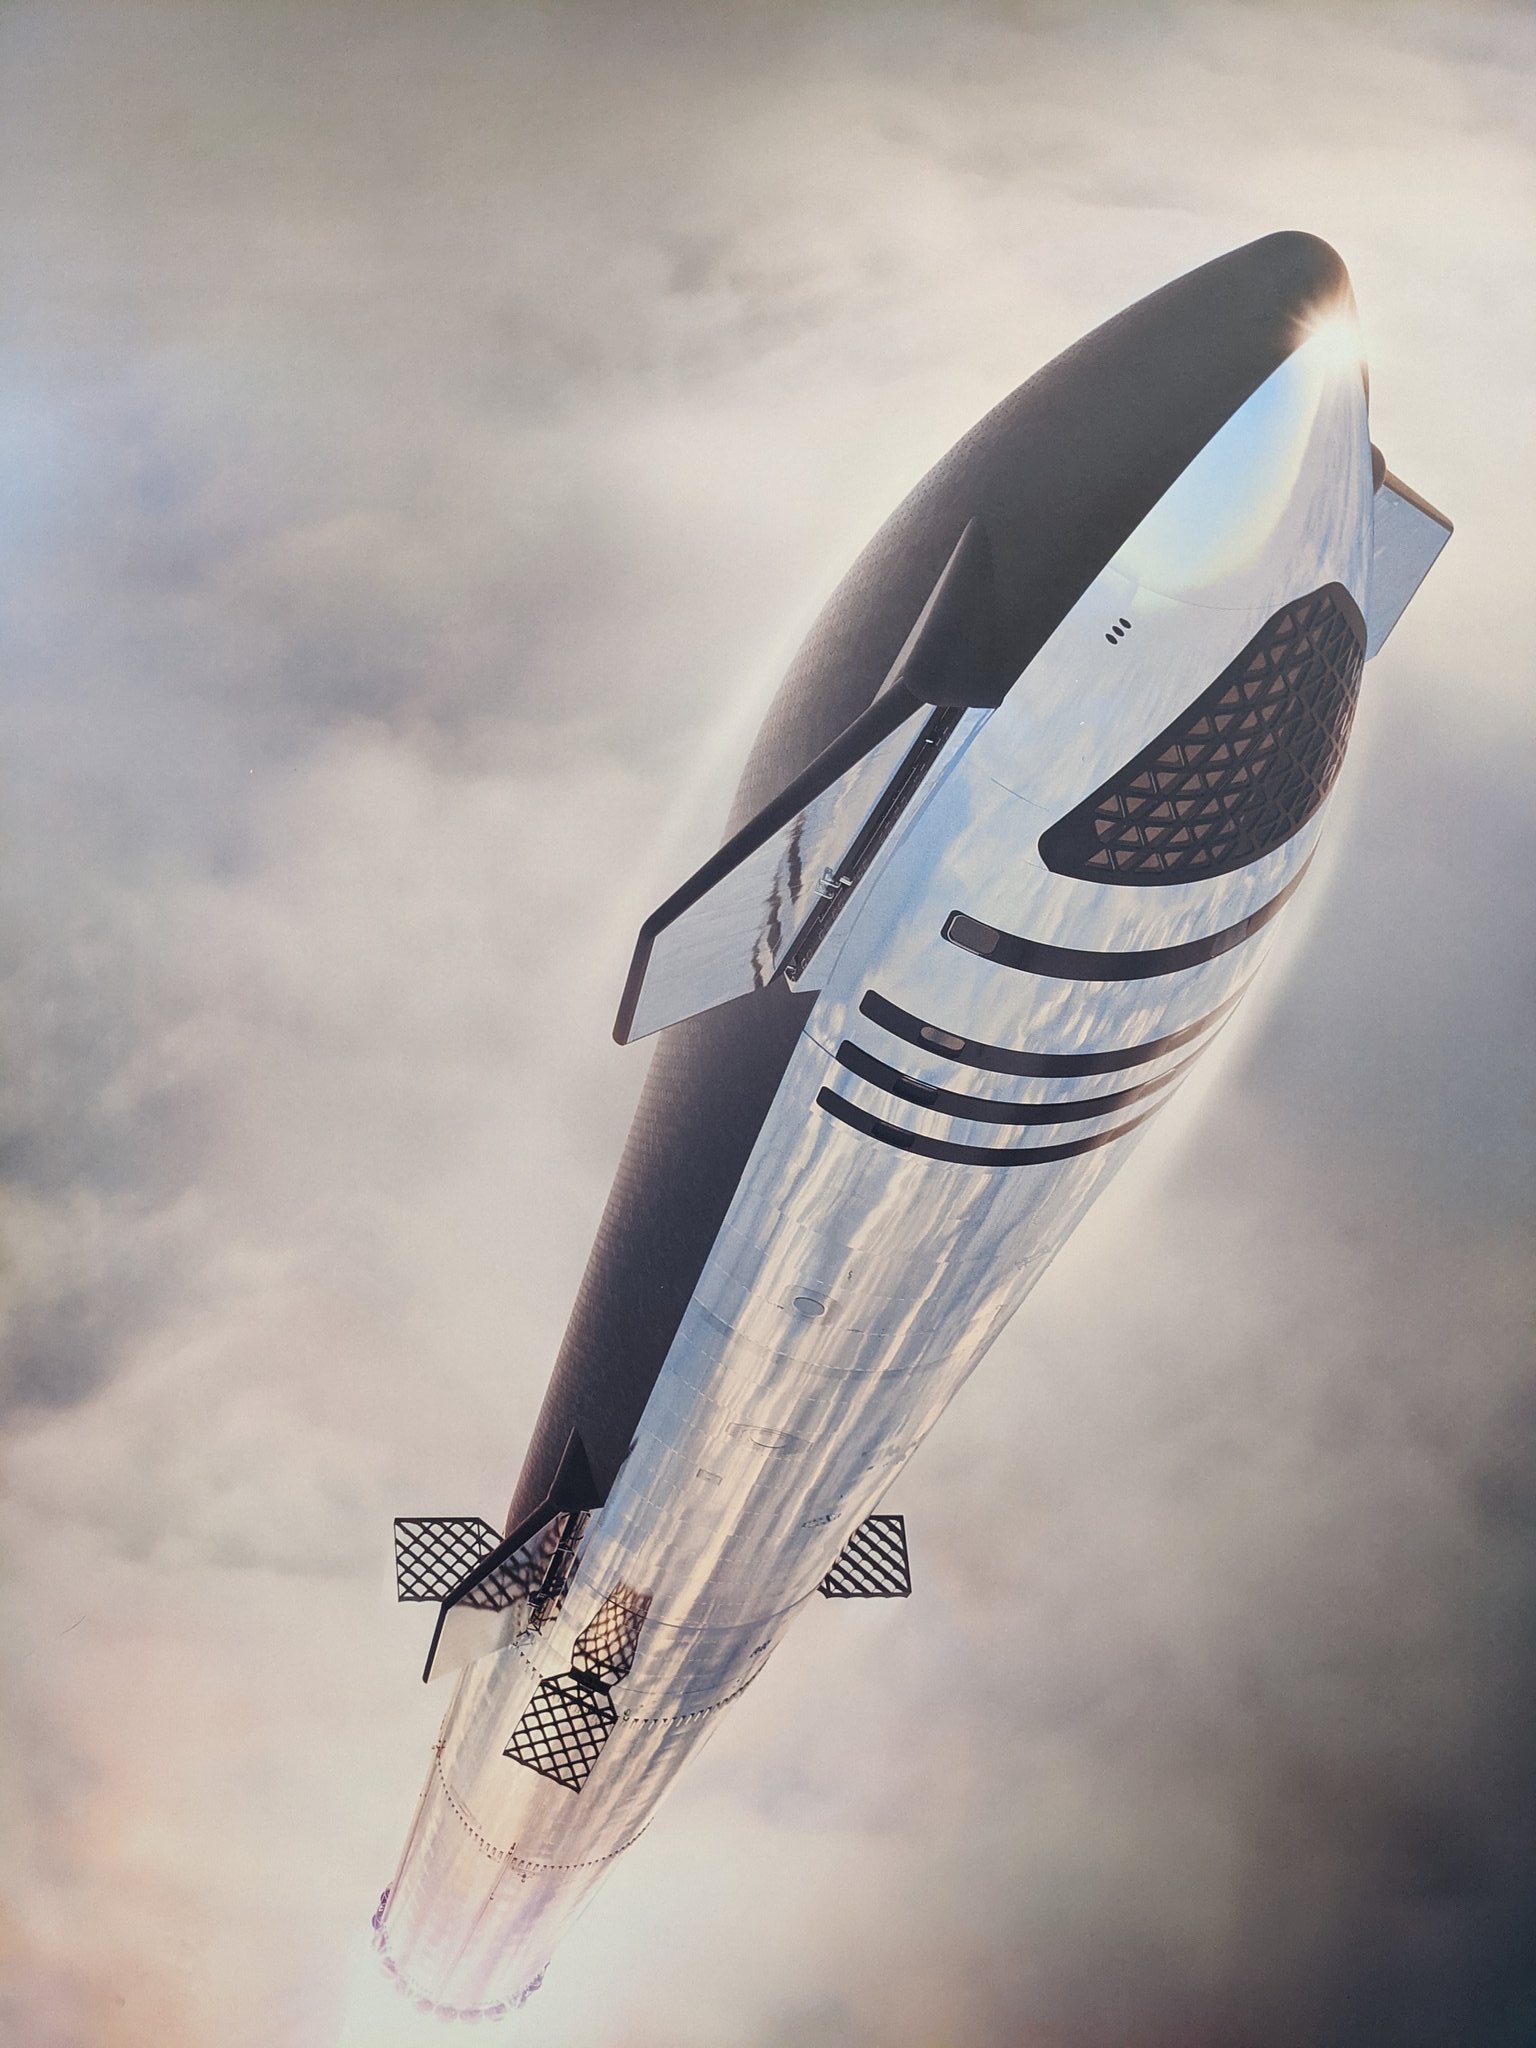 SpaceX's new render of Starship in flight with changes.